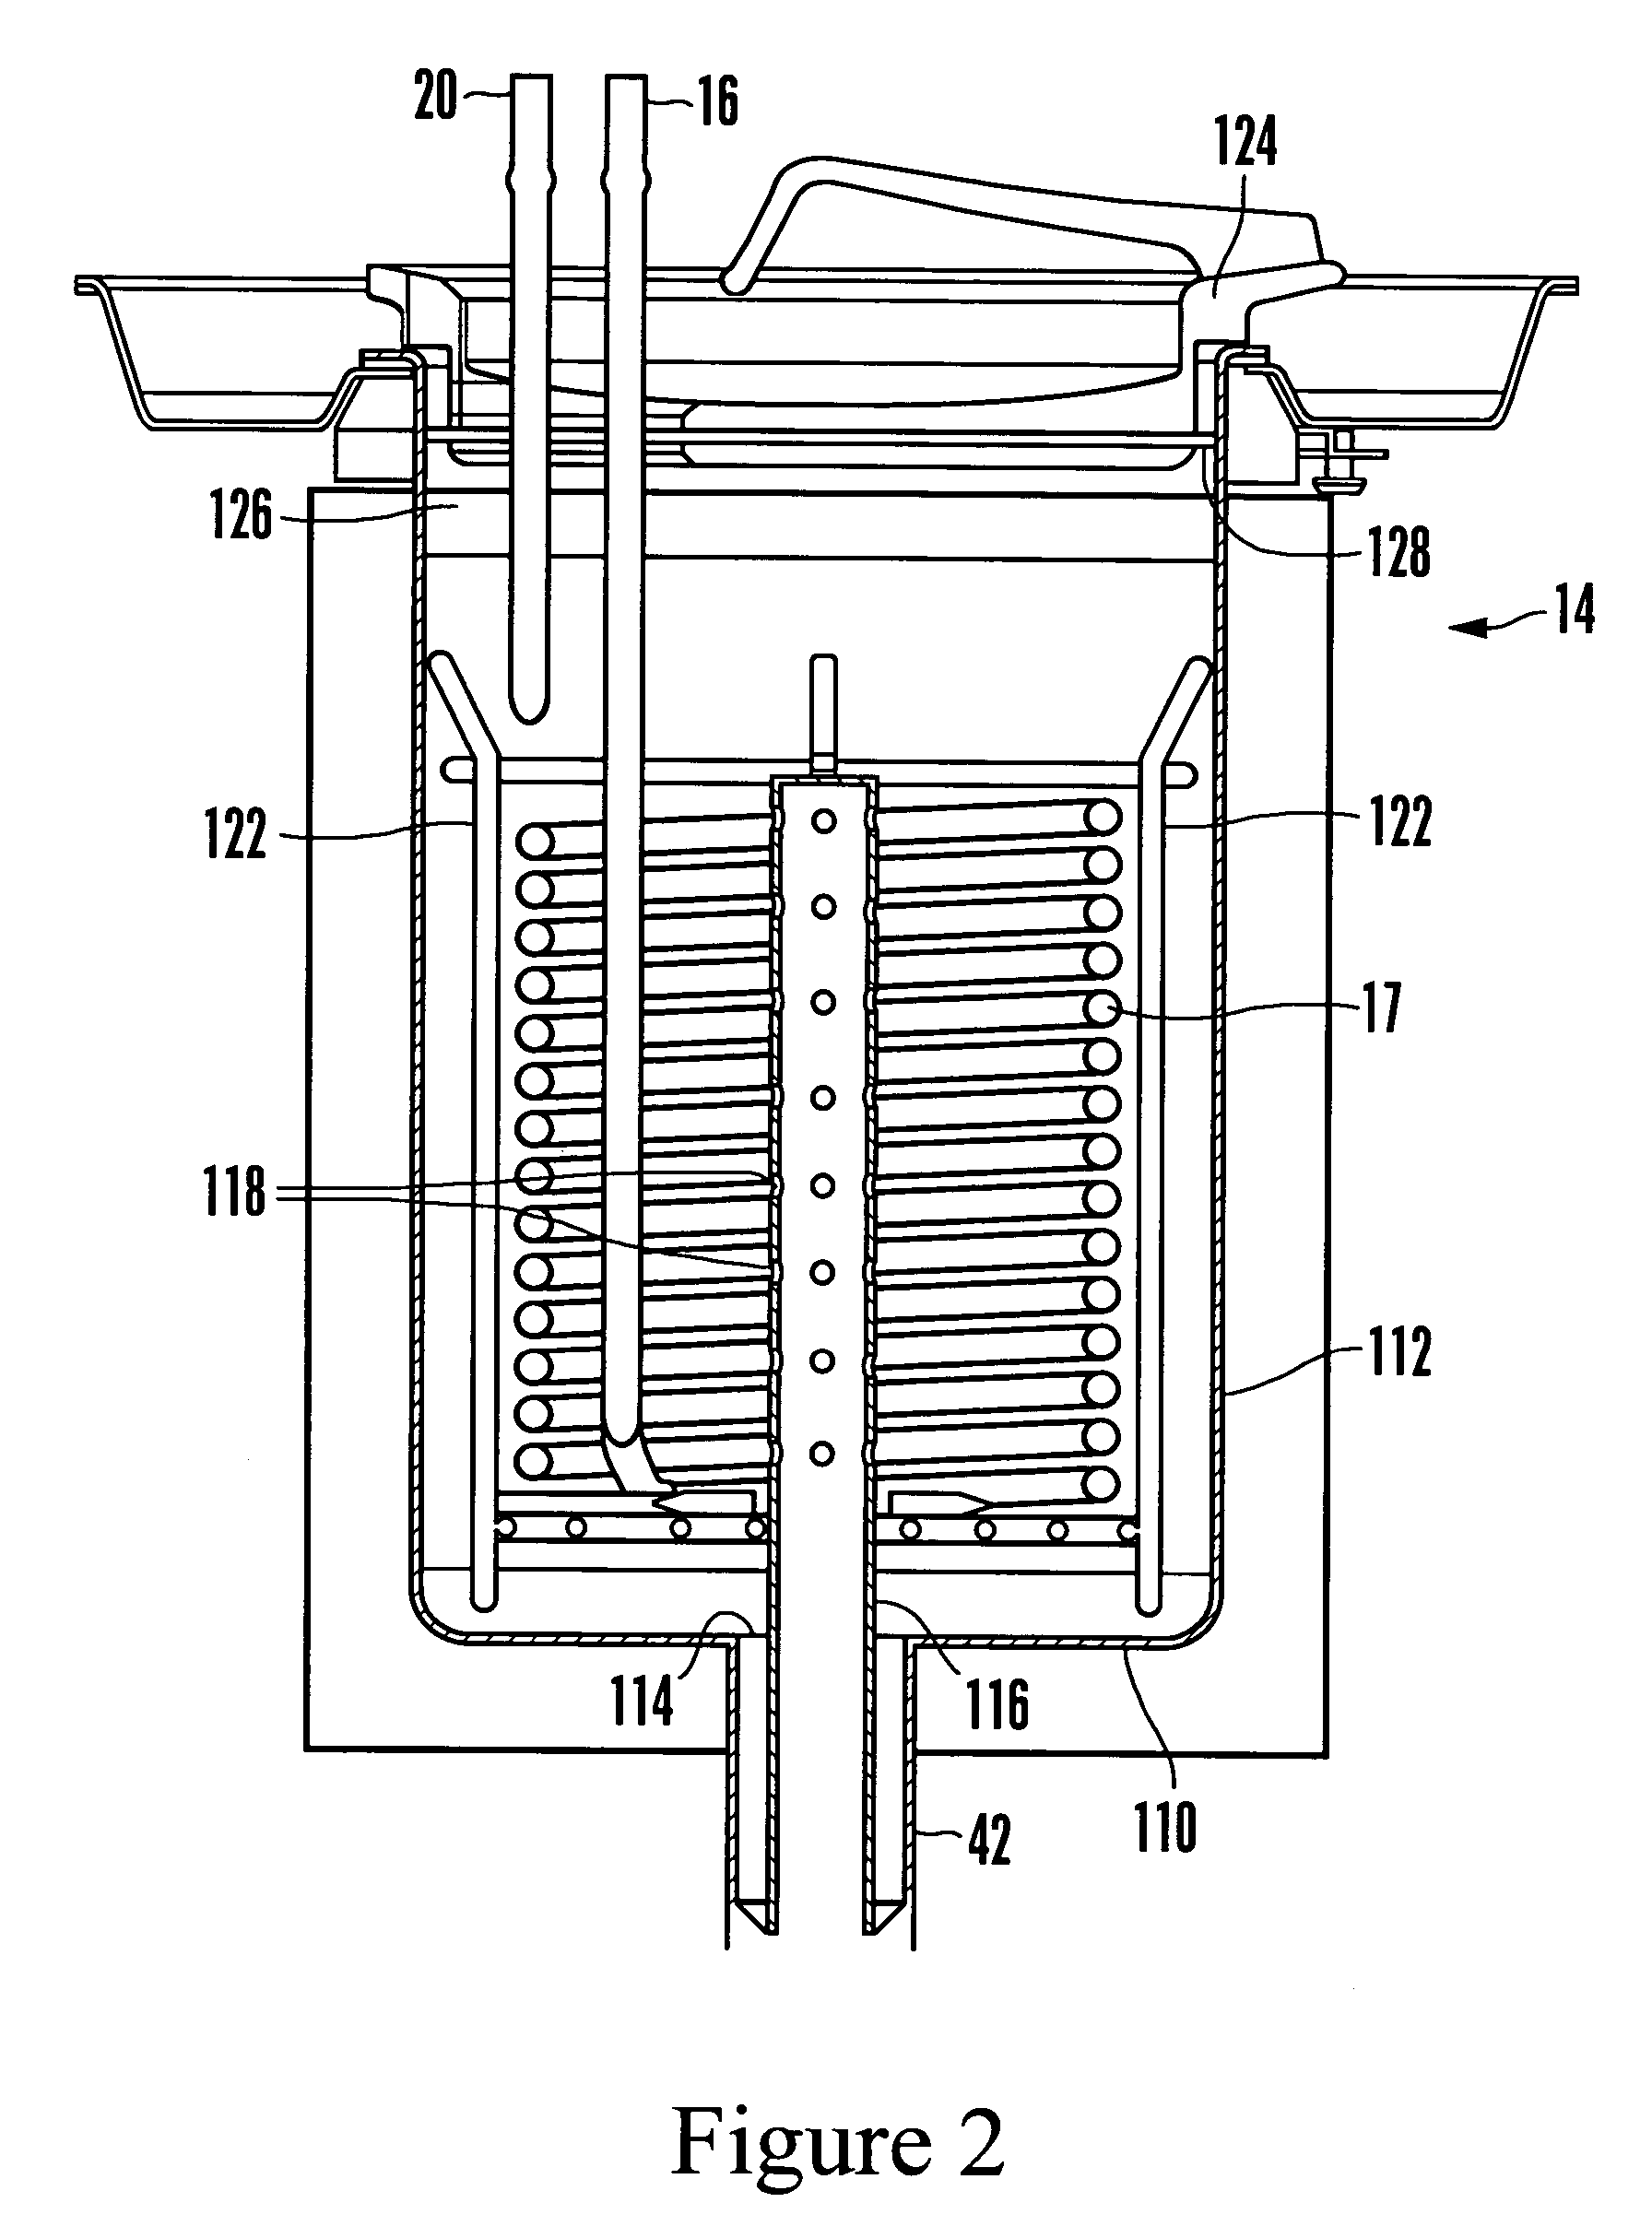 Heating/cooling system for indwelling heat exchange catheter